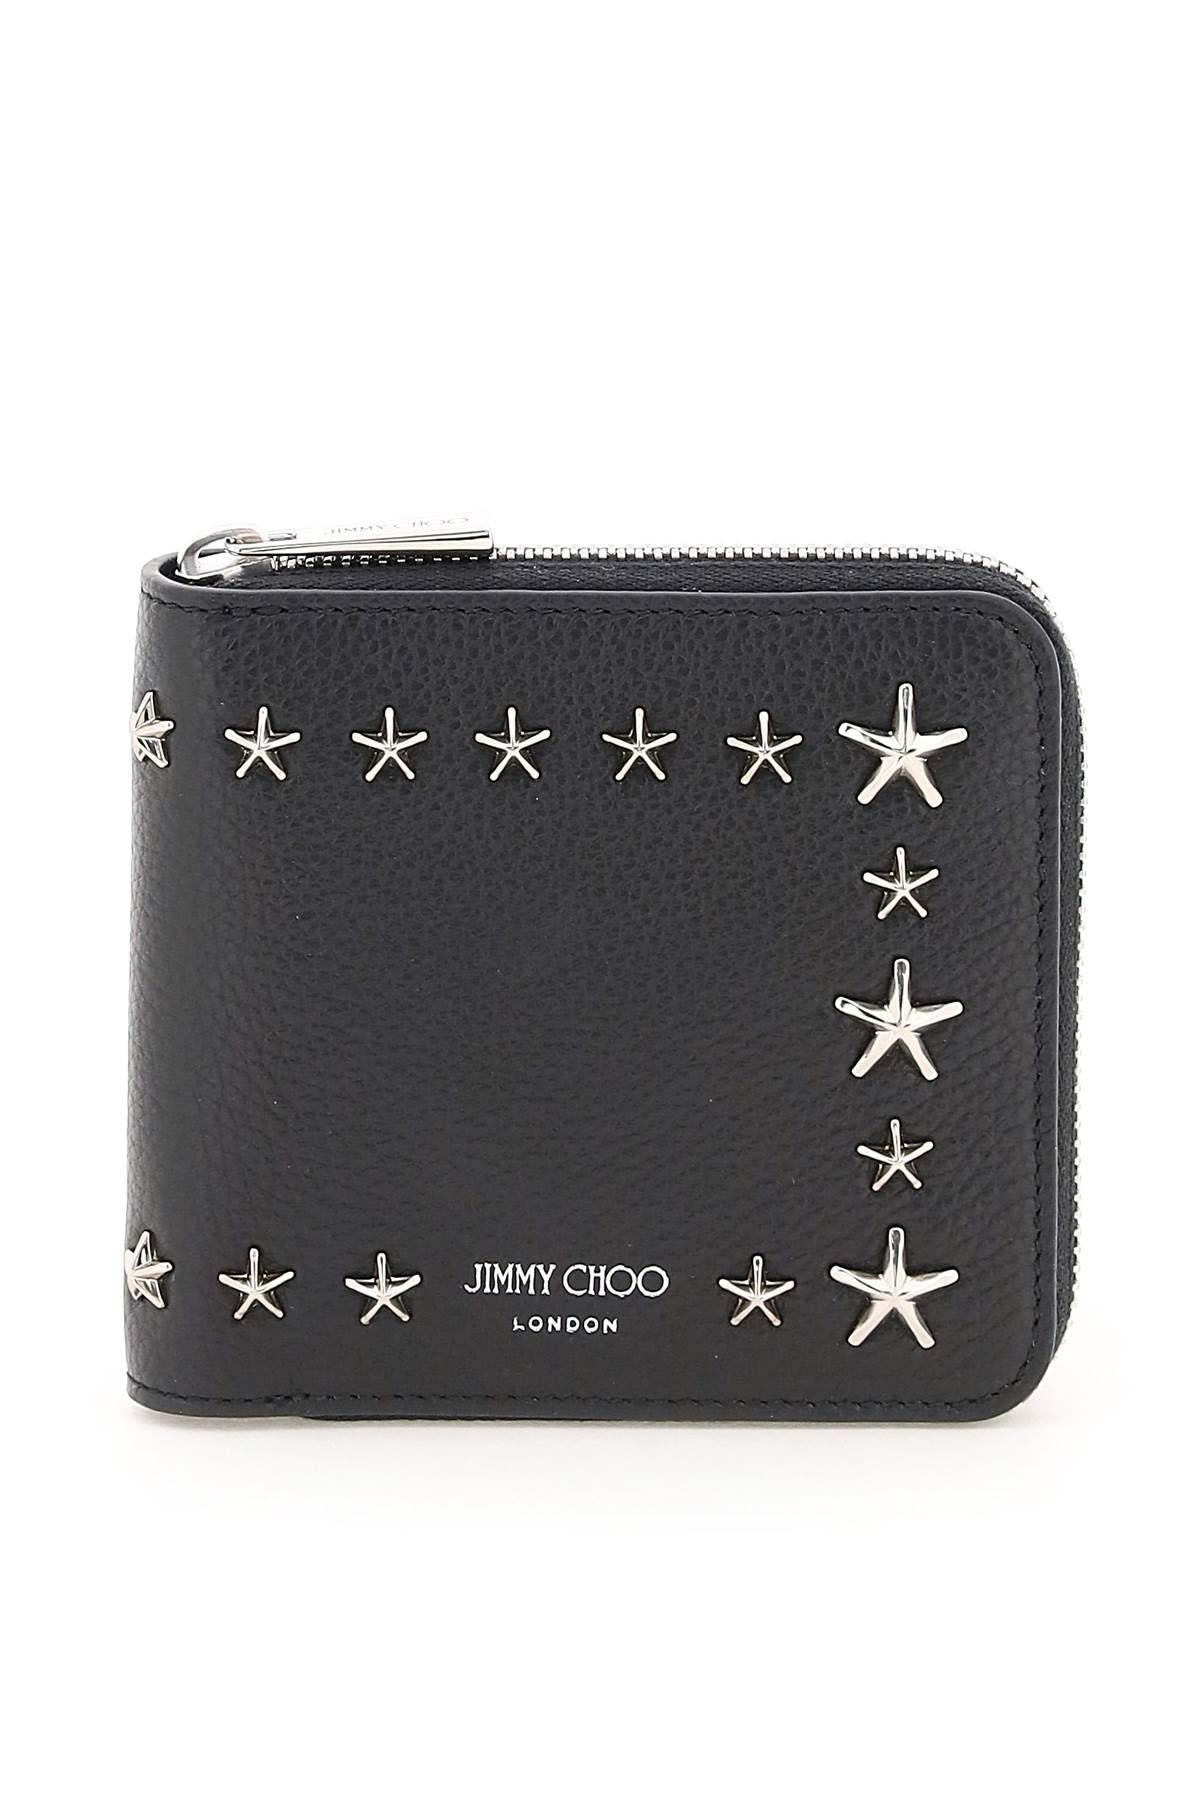 Jimmy Choo Leather Star Zip Around Wallet in Black for Men - Save 12% | Lyst